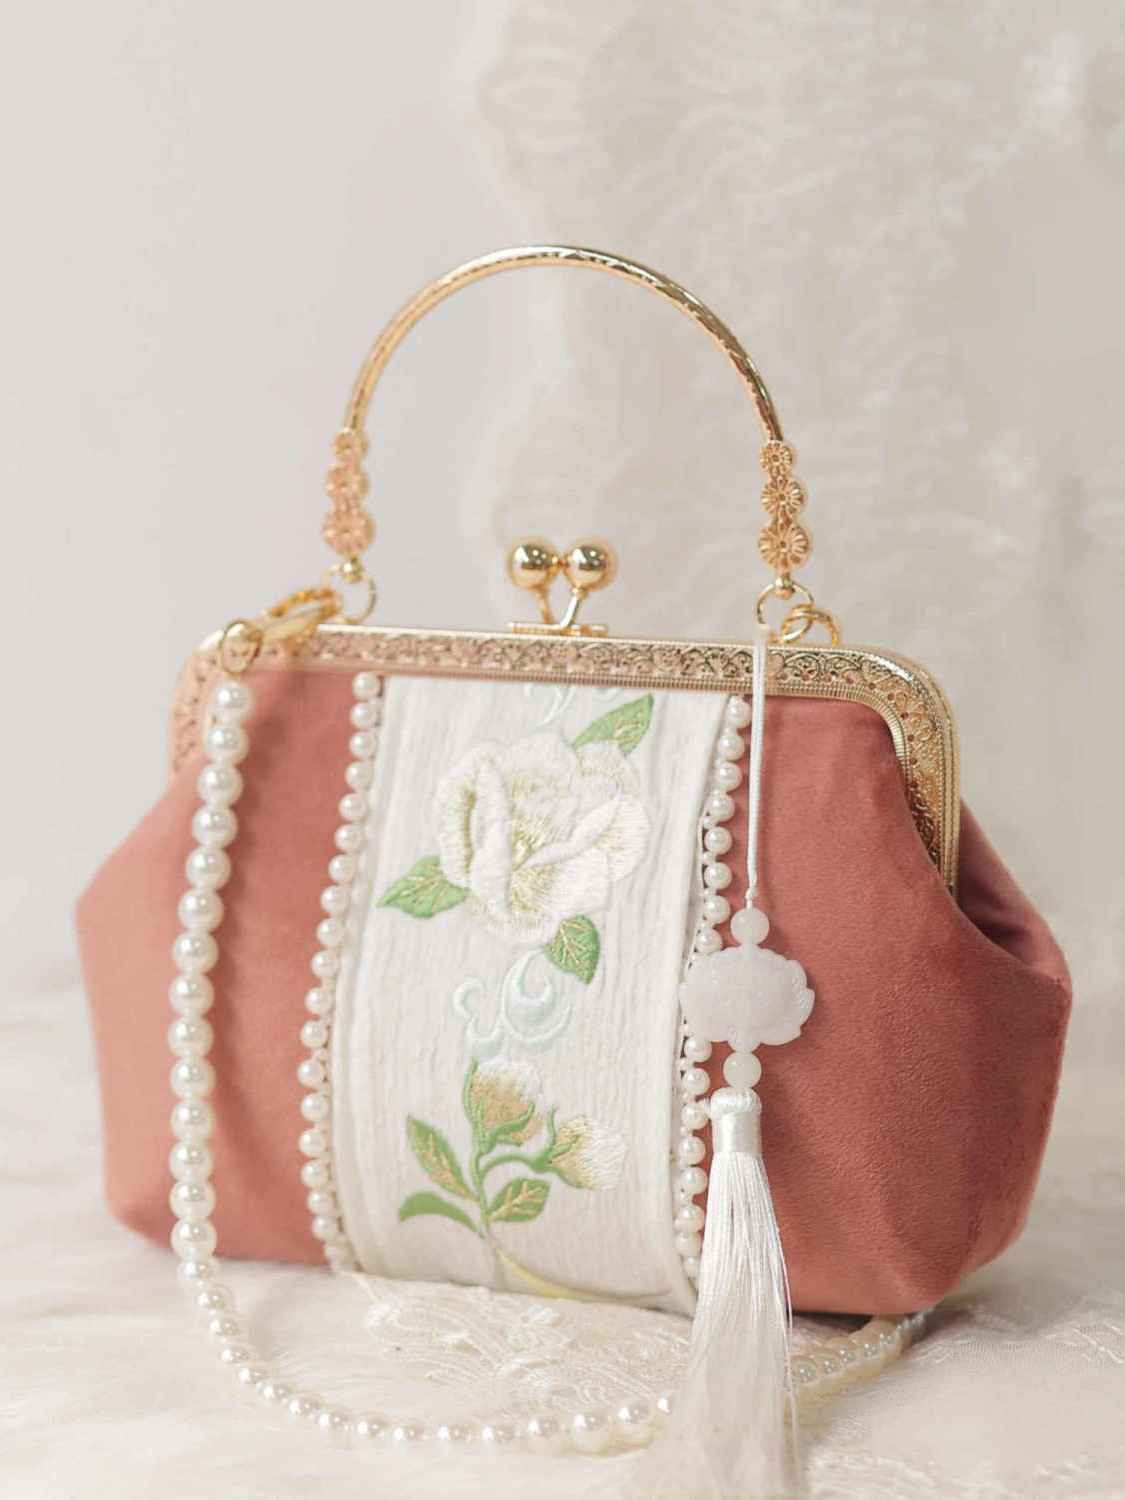 Handmade Embobridery Bag Handmade Embroidery Hanfu/Qipao Cheongsam Bag - Elegant and Practical Accessory with Intricate Traditional Chinese Designs for Fashion-Forward Women - Shop Now